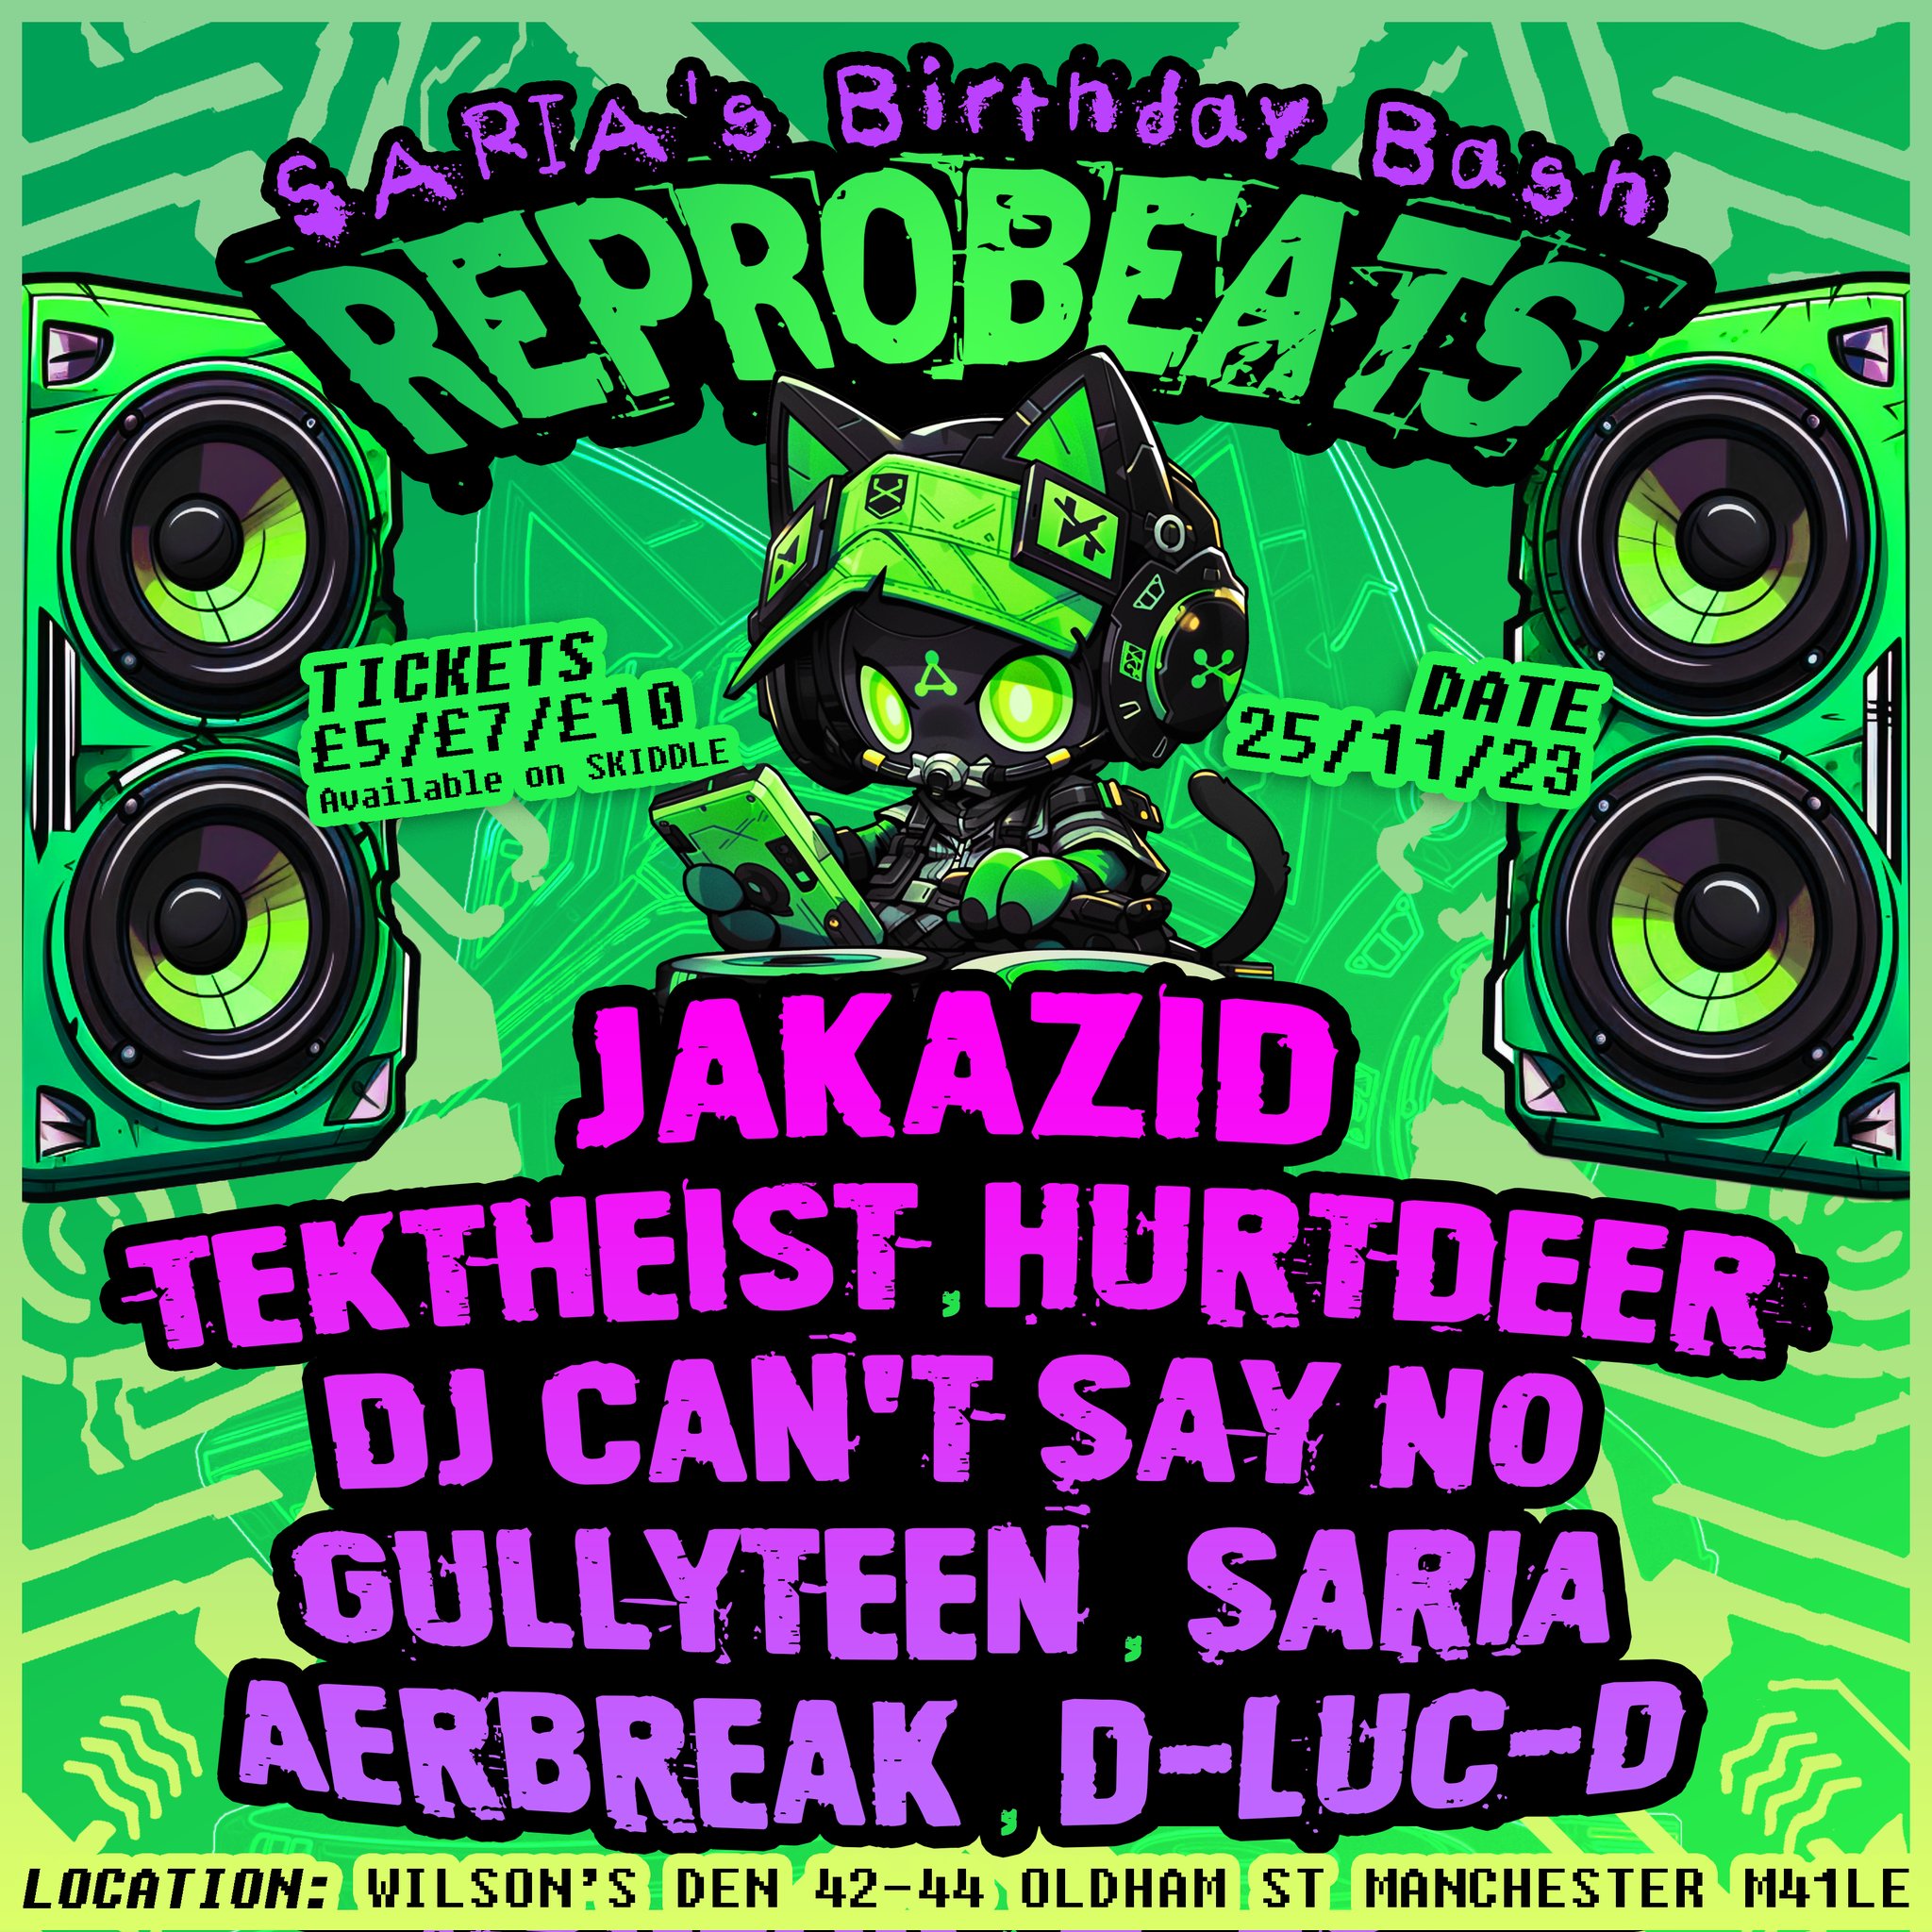 SARIA @ Reprobeats 25.11 on X: I'm up in a few hours now! I'm